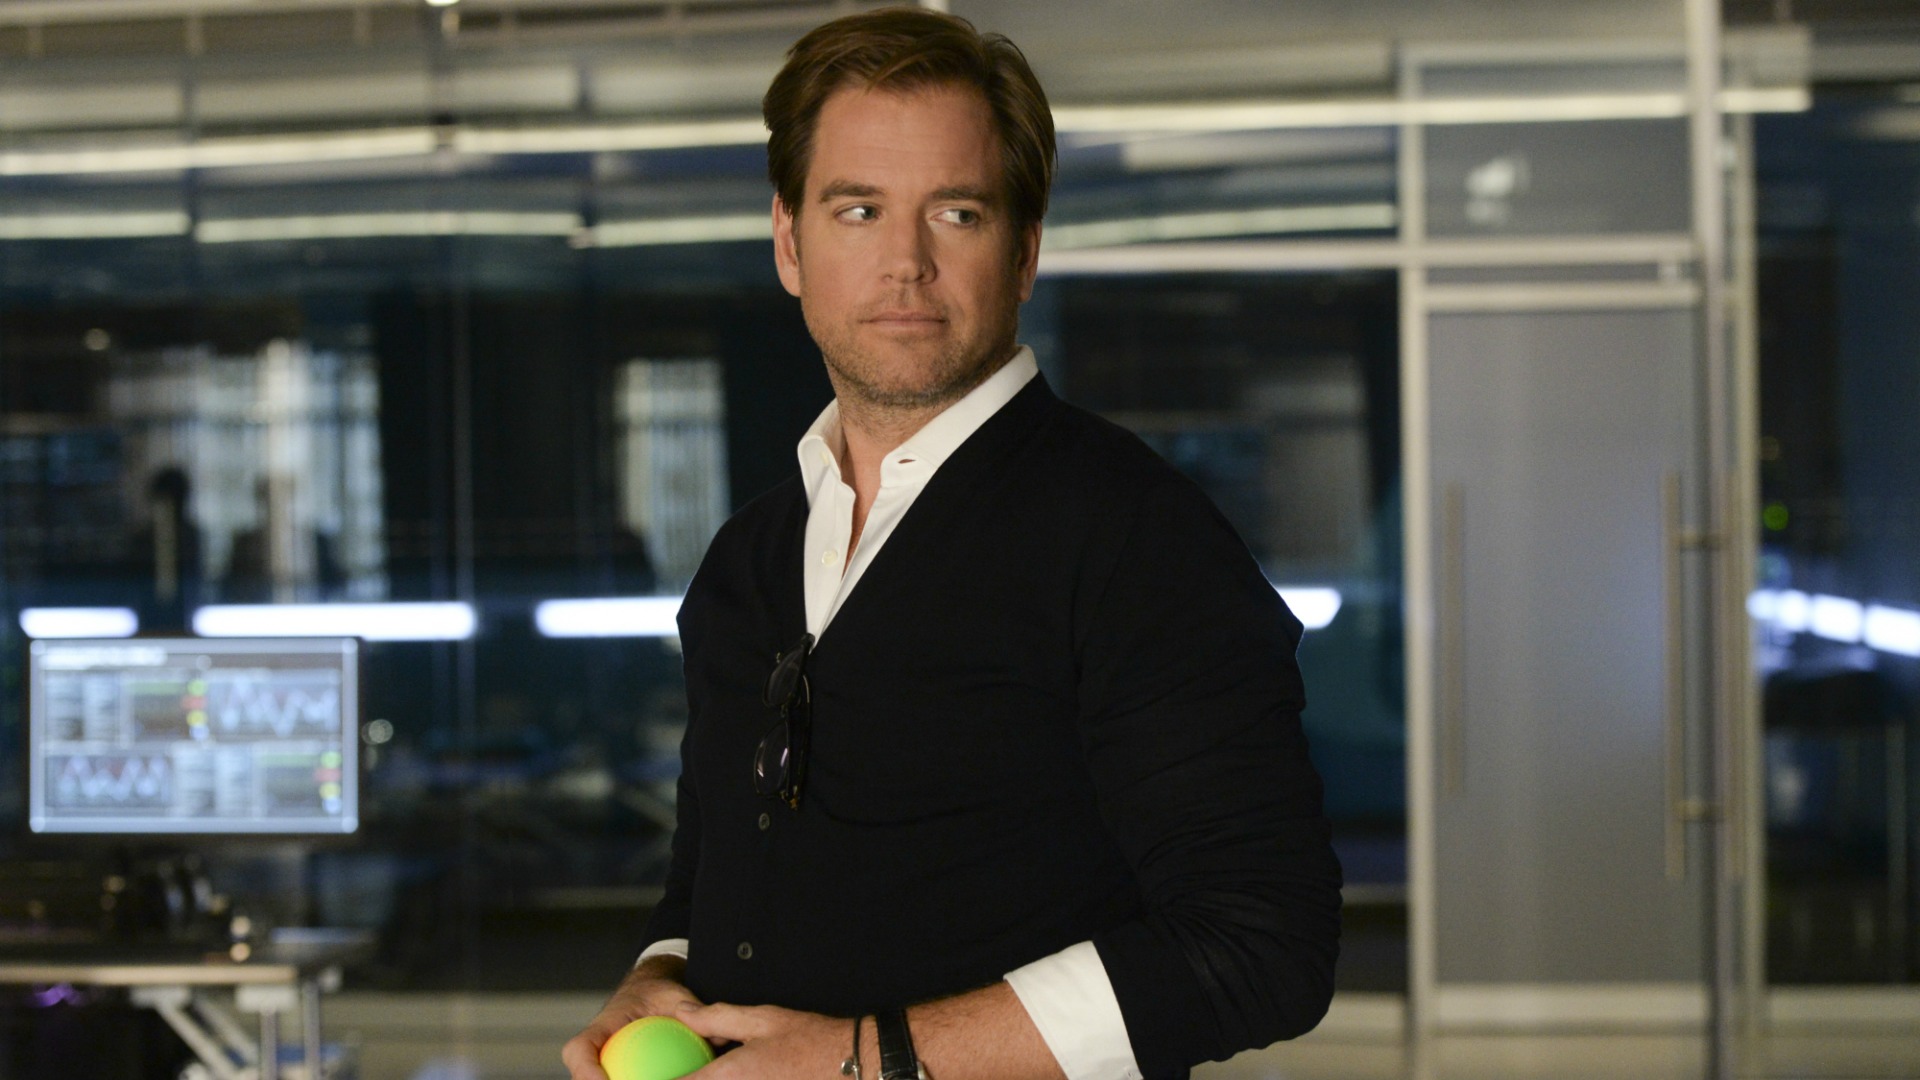 Bull Is Driven To Save His Client - Bull Photos - CBS.com